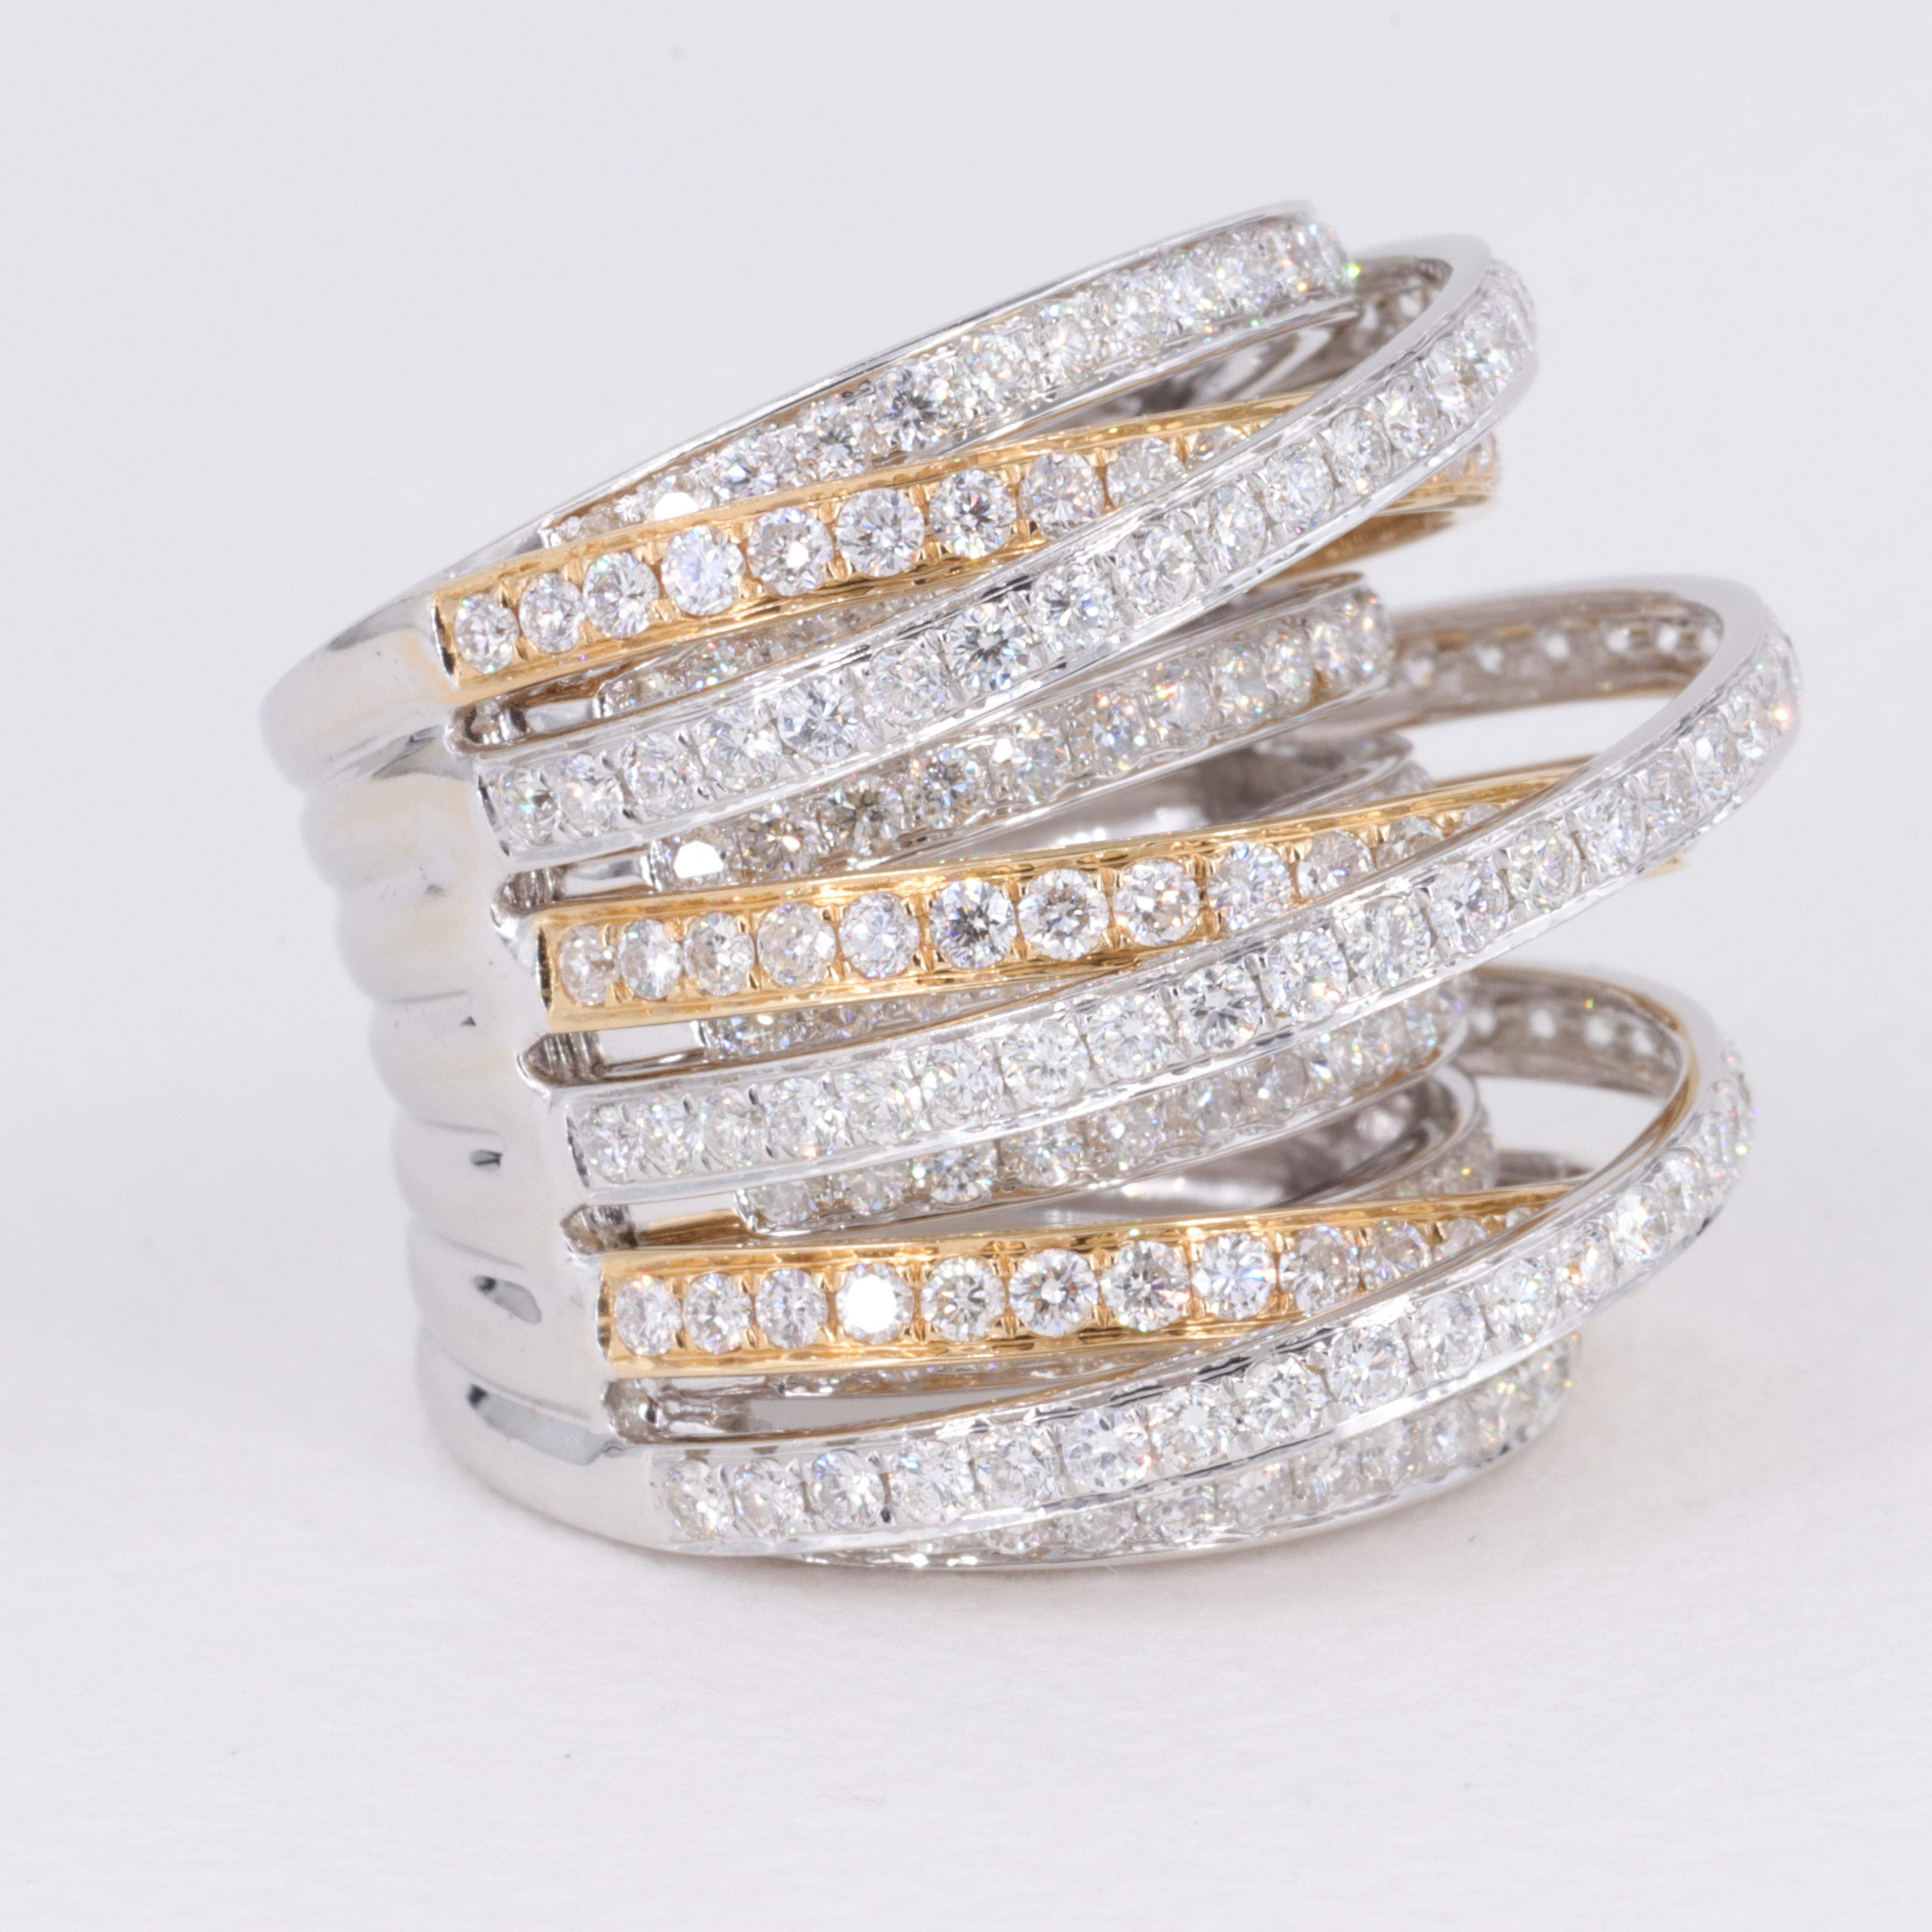 4.52 Carat Diamond Multi Row 18 Karat White & Yellow Gold Cocktail Ring Band In Good Condition For Sale In Tampa, FL